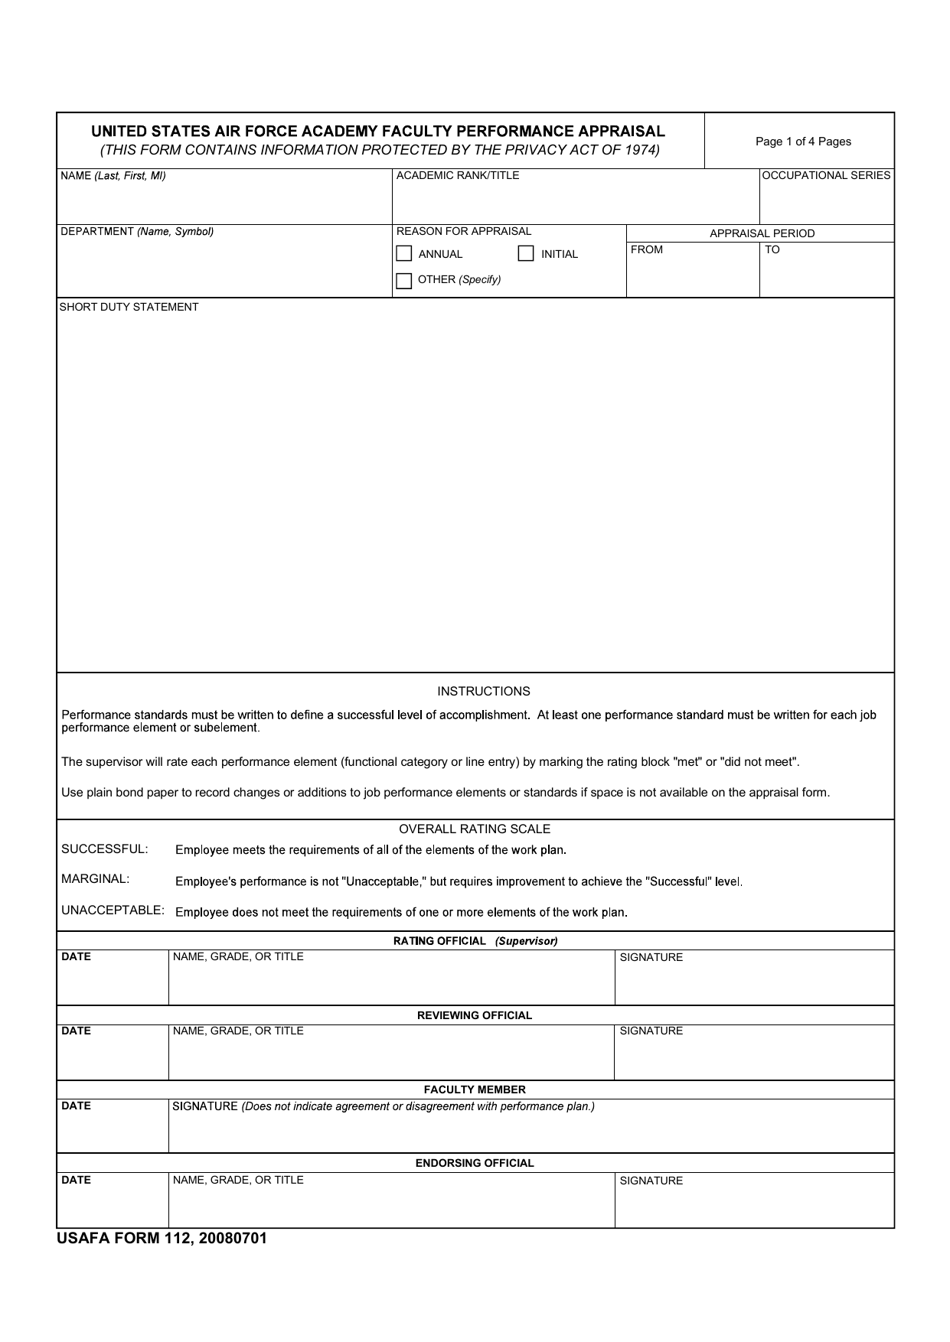 USAFA Form 112 United States Air Force Academy Faculty Performance Appraisal, Page 1